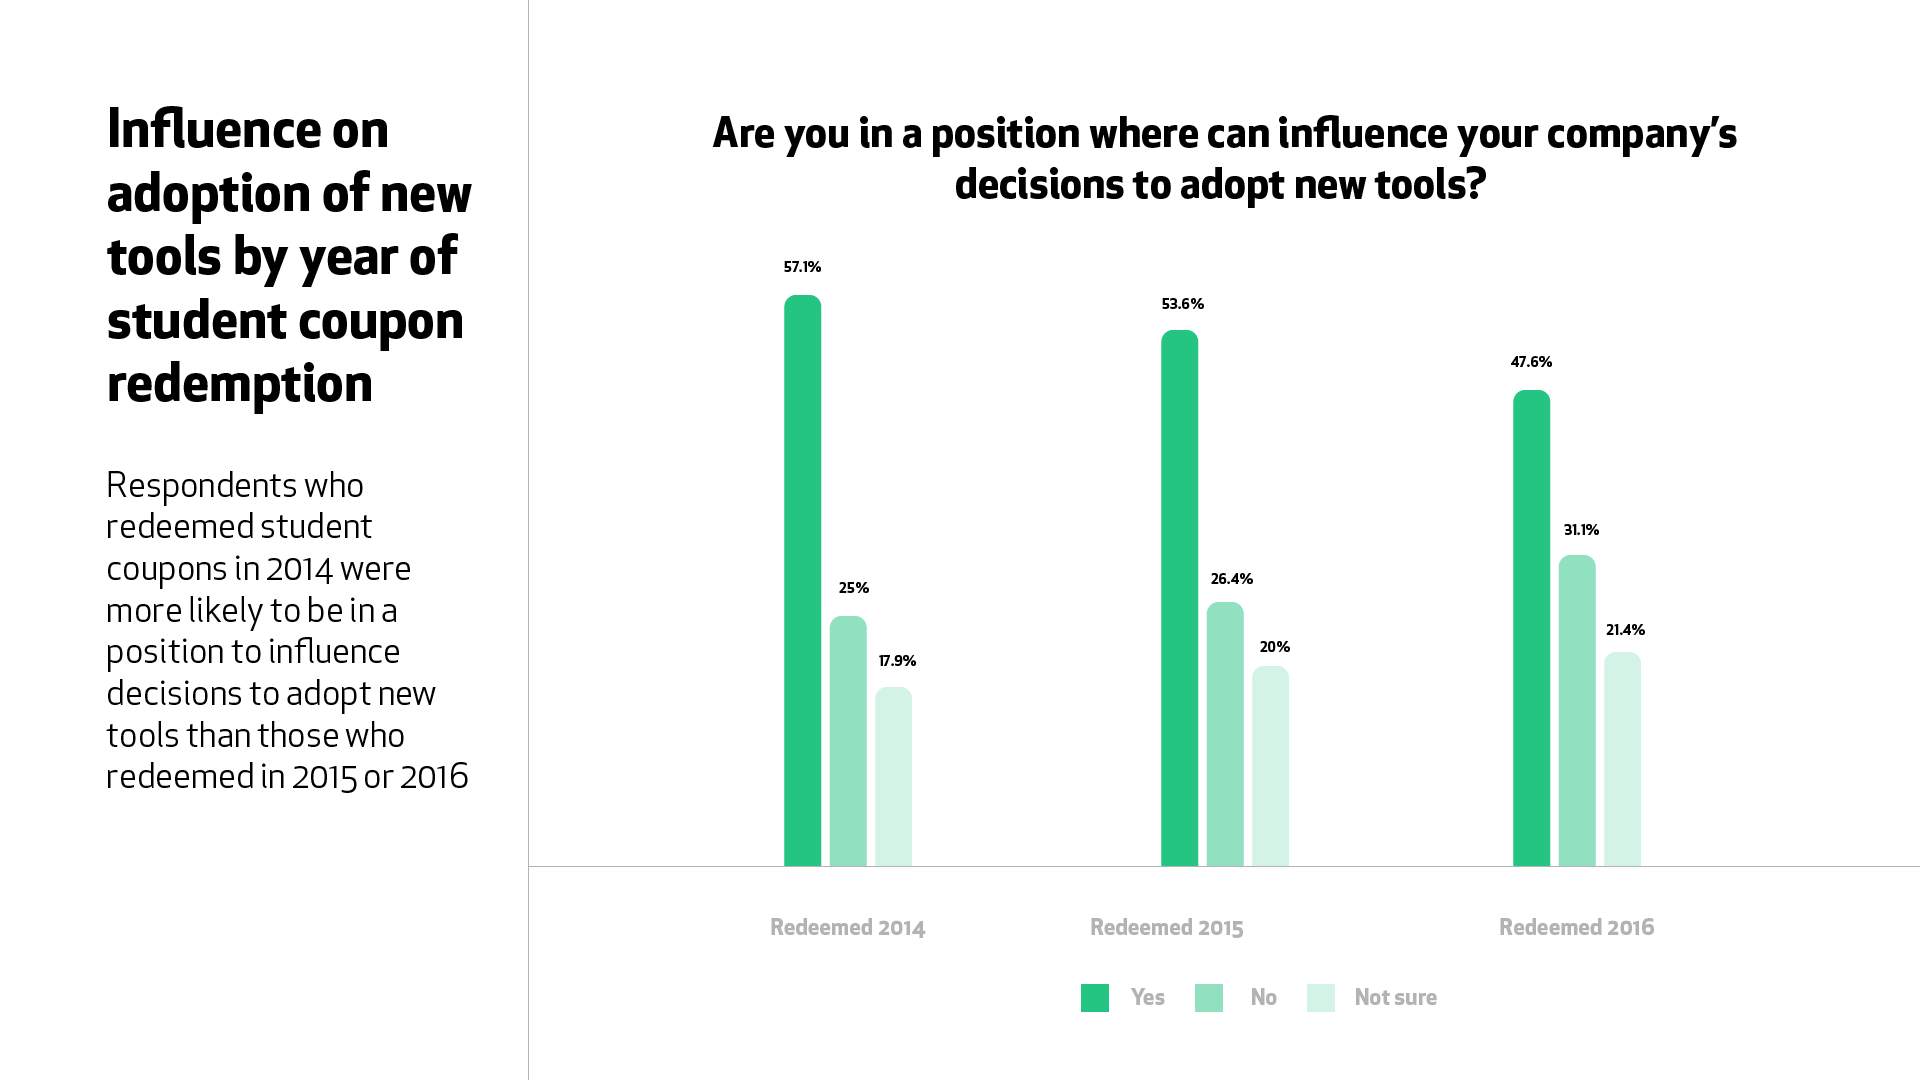 A graph for the question, “Are you in a position where you can influence your company’s decisions to adopt new tools?” Respondents who joined student programs in 2014 were more likely to be in a position to influence decisions to adopt new tools (57.1%) than those in 2015 (53.6%) or 2016 (47.6%).